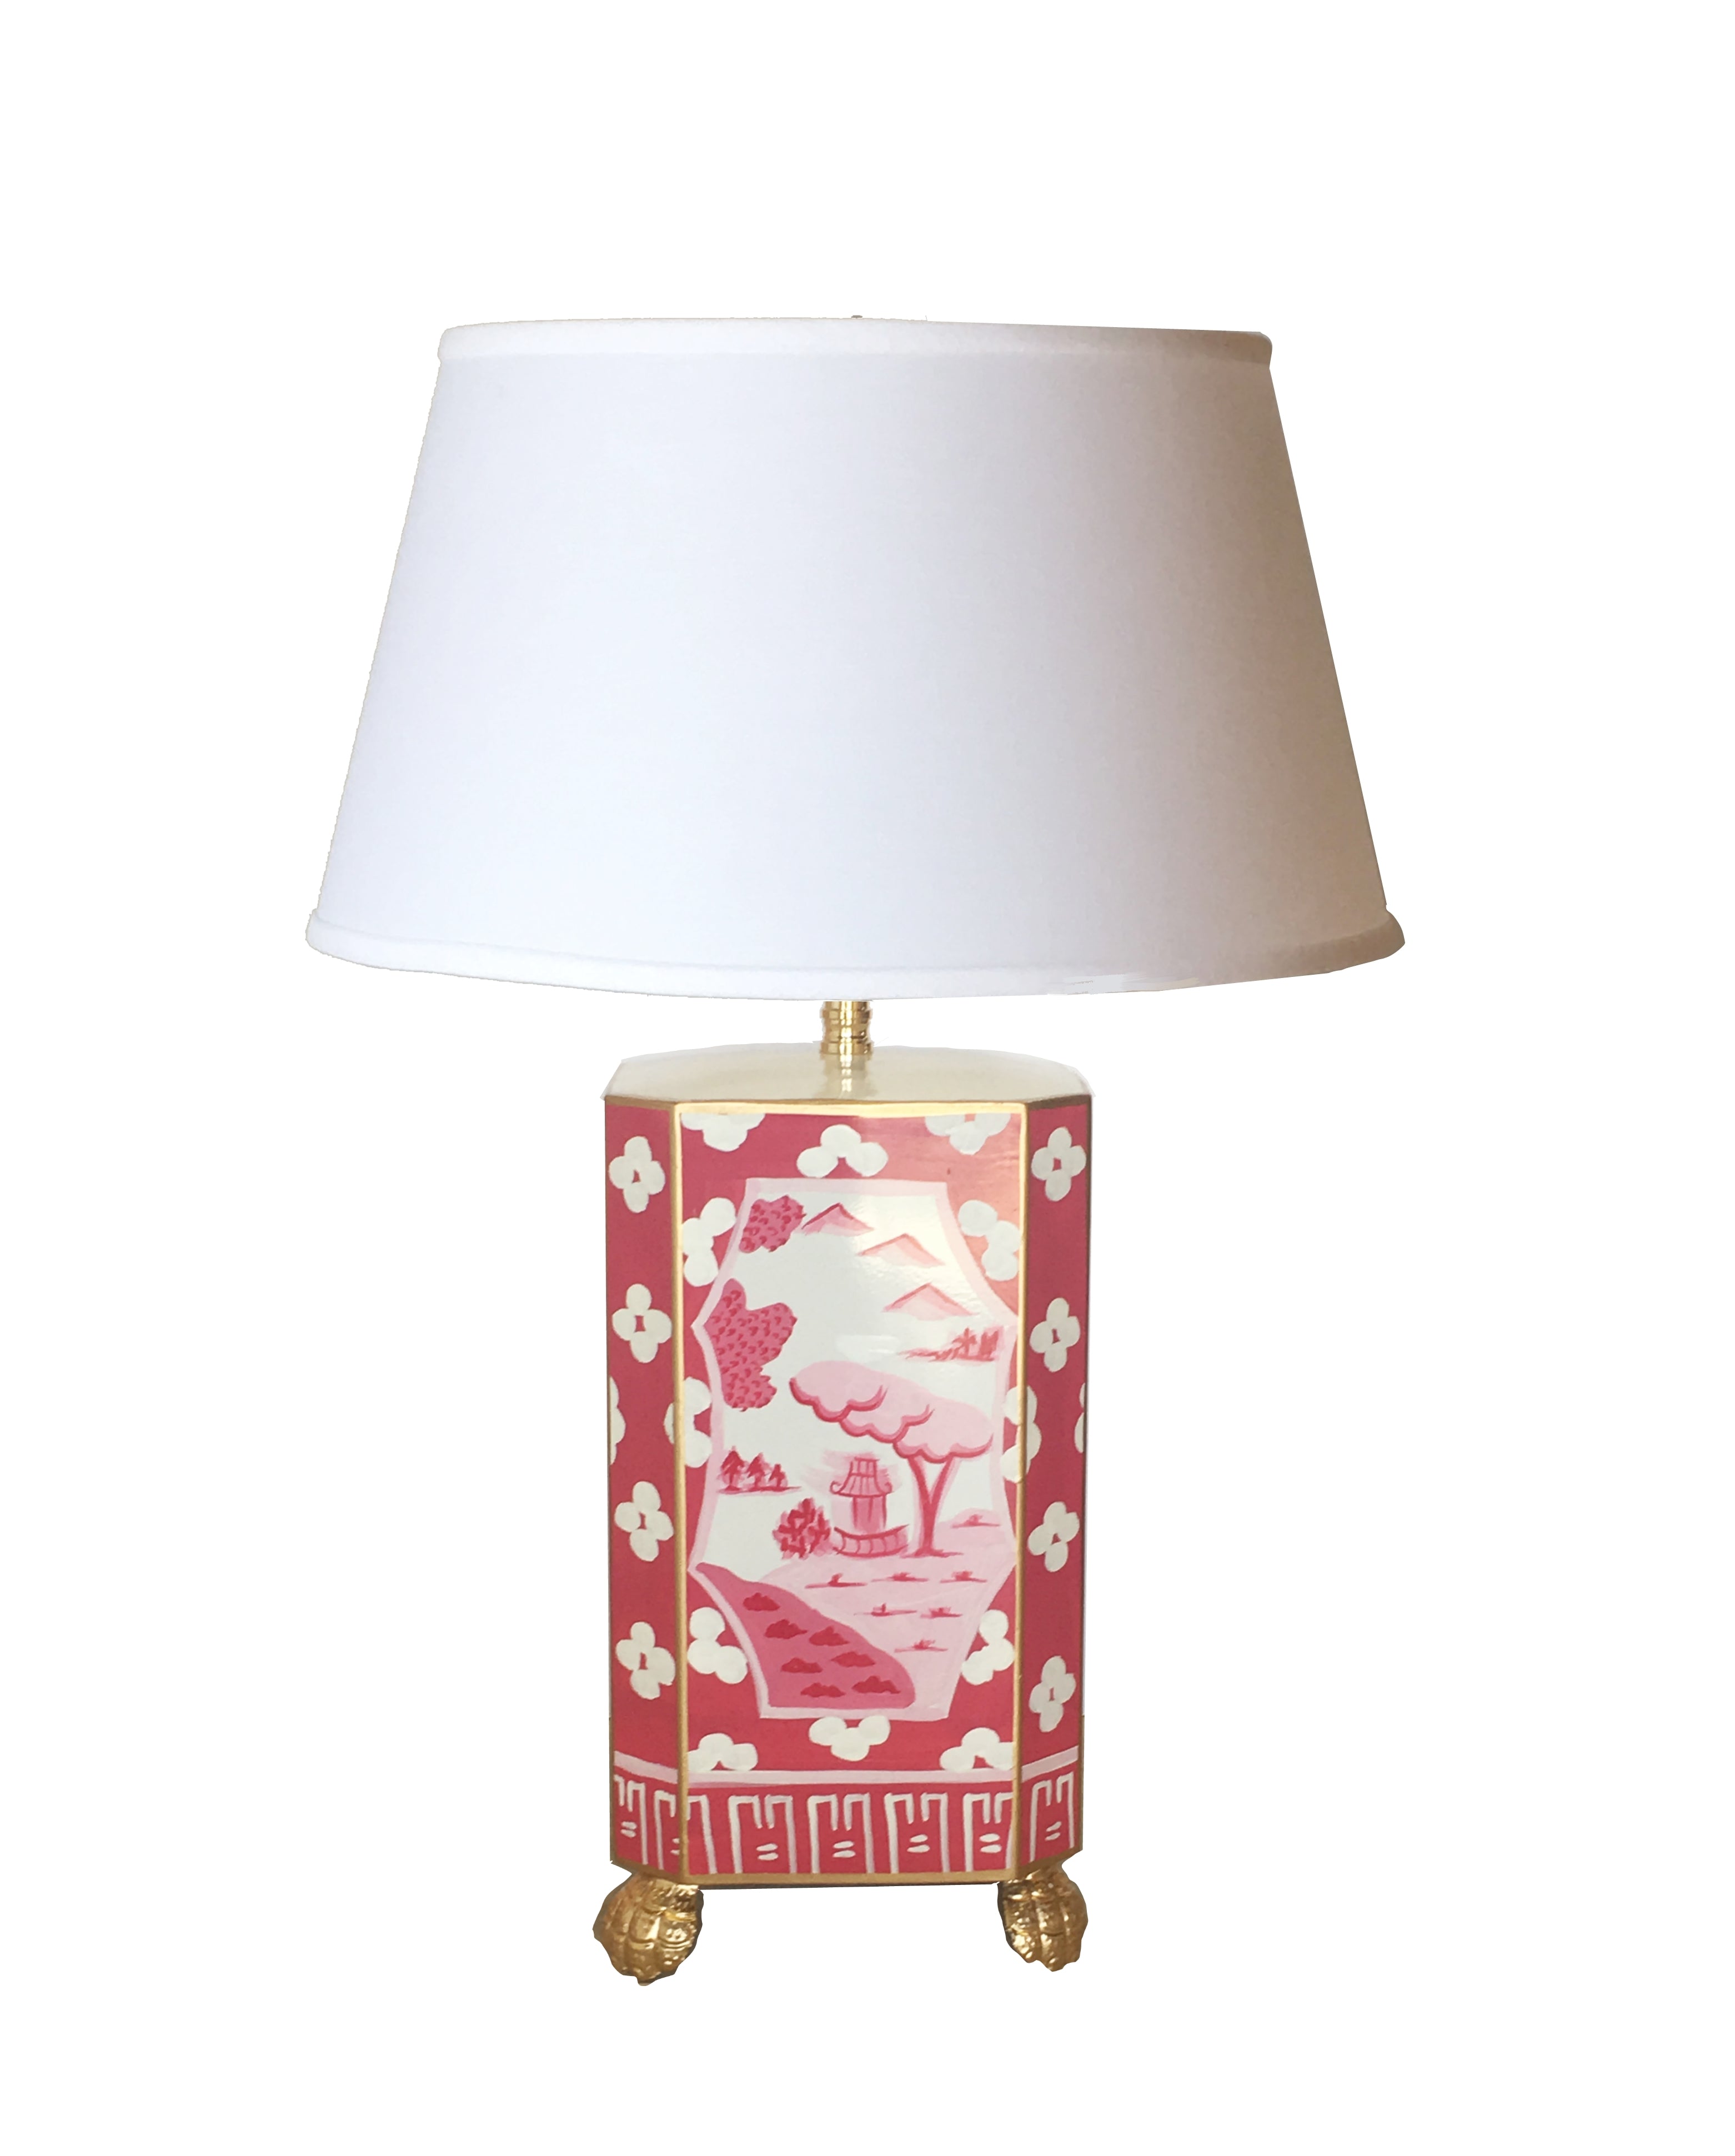 Dana Gibson Canton in Pink Lamp with White Shade, Small